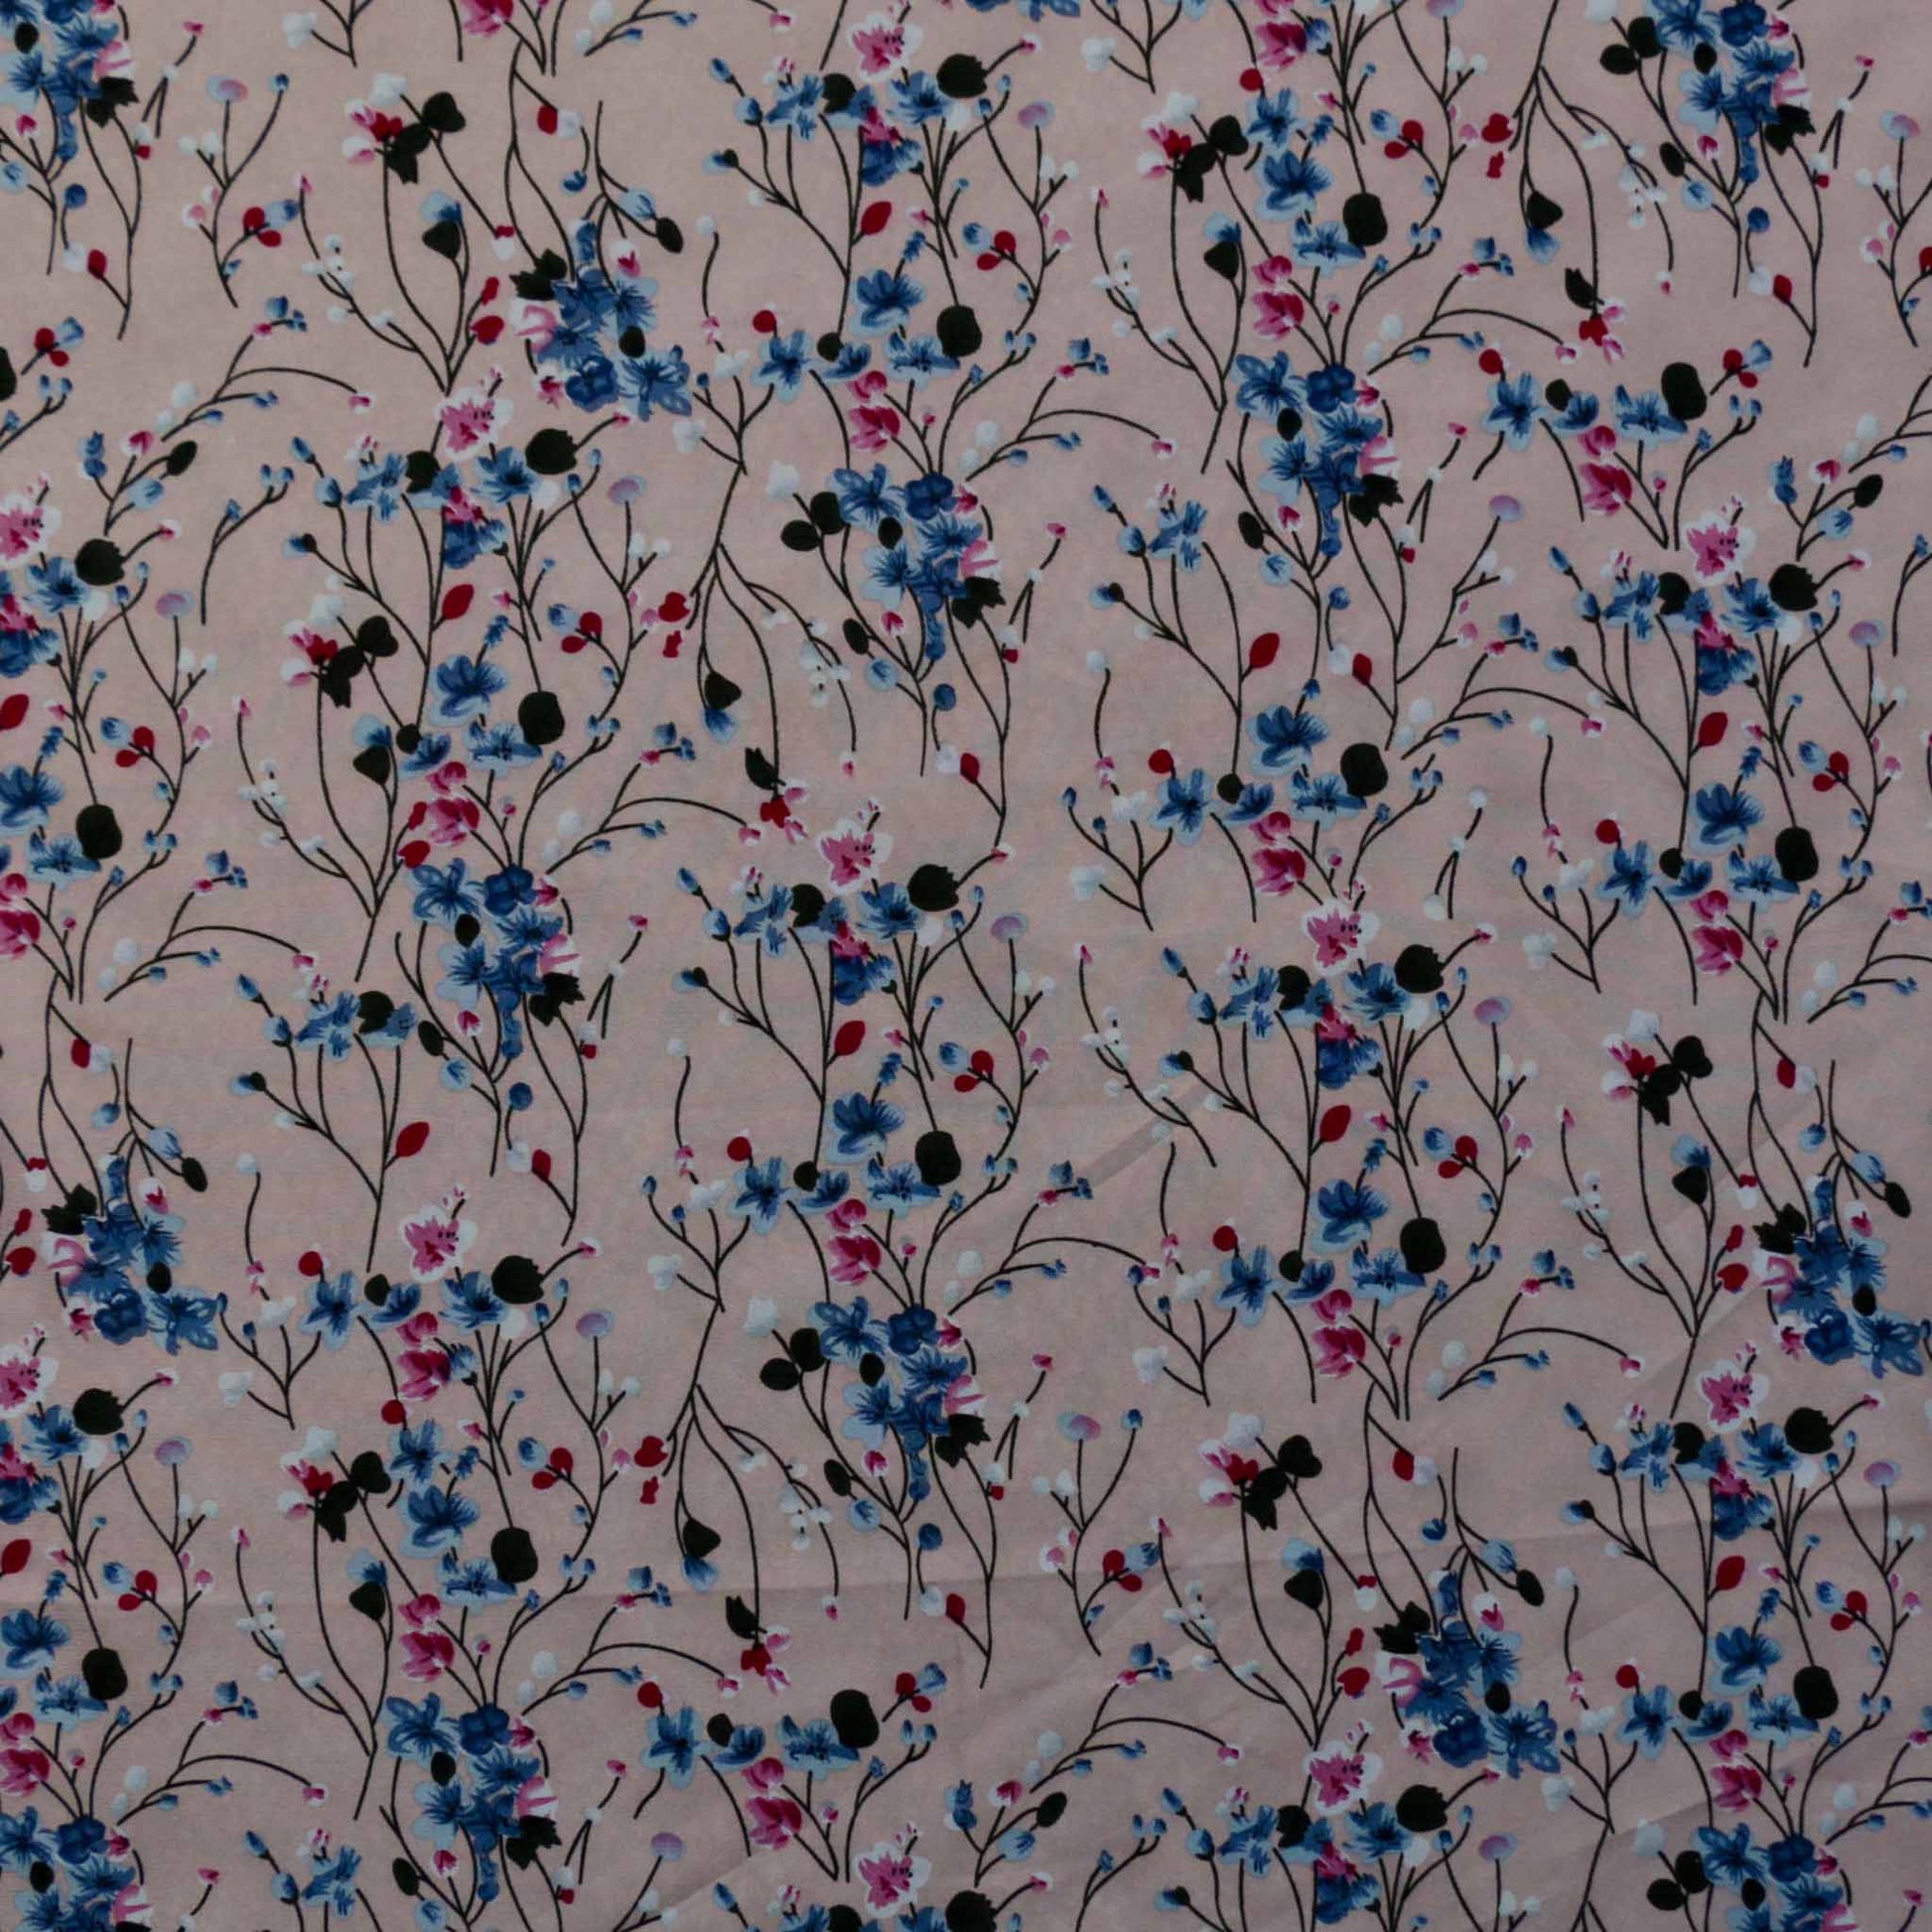 stretchy pink chiffon floral dressmaking fabric with blue flowers